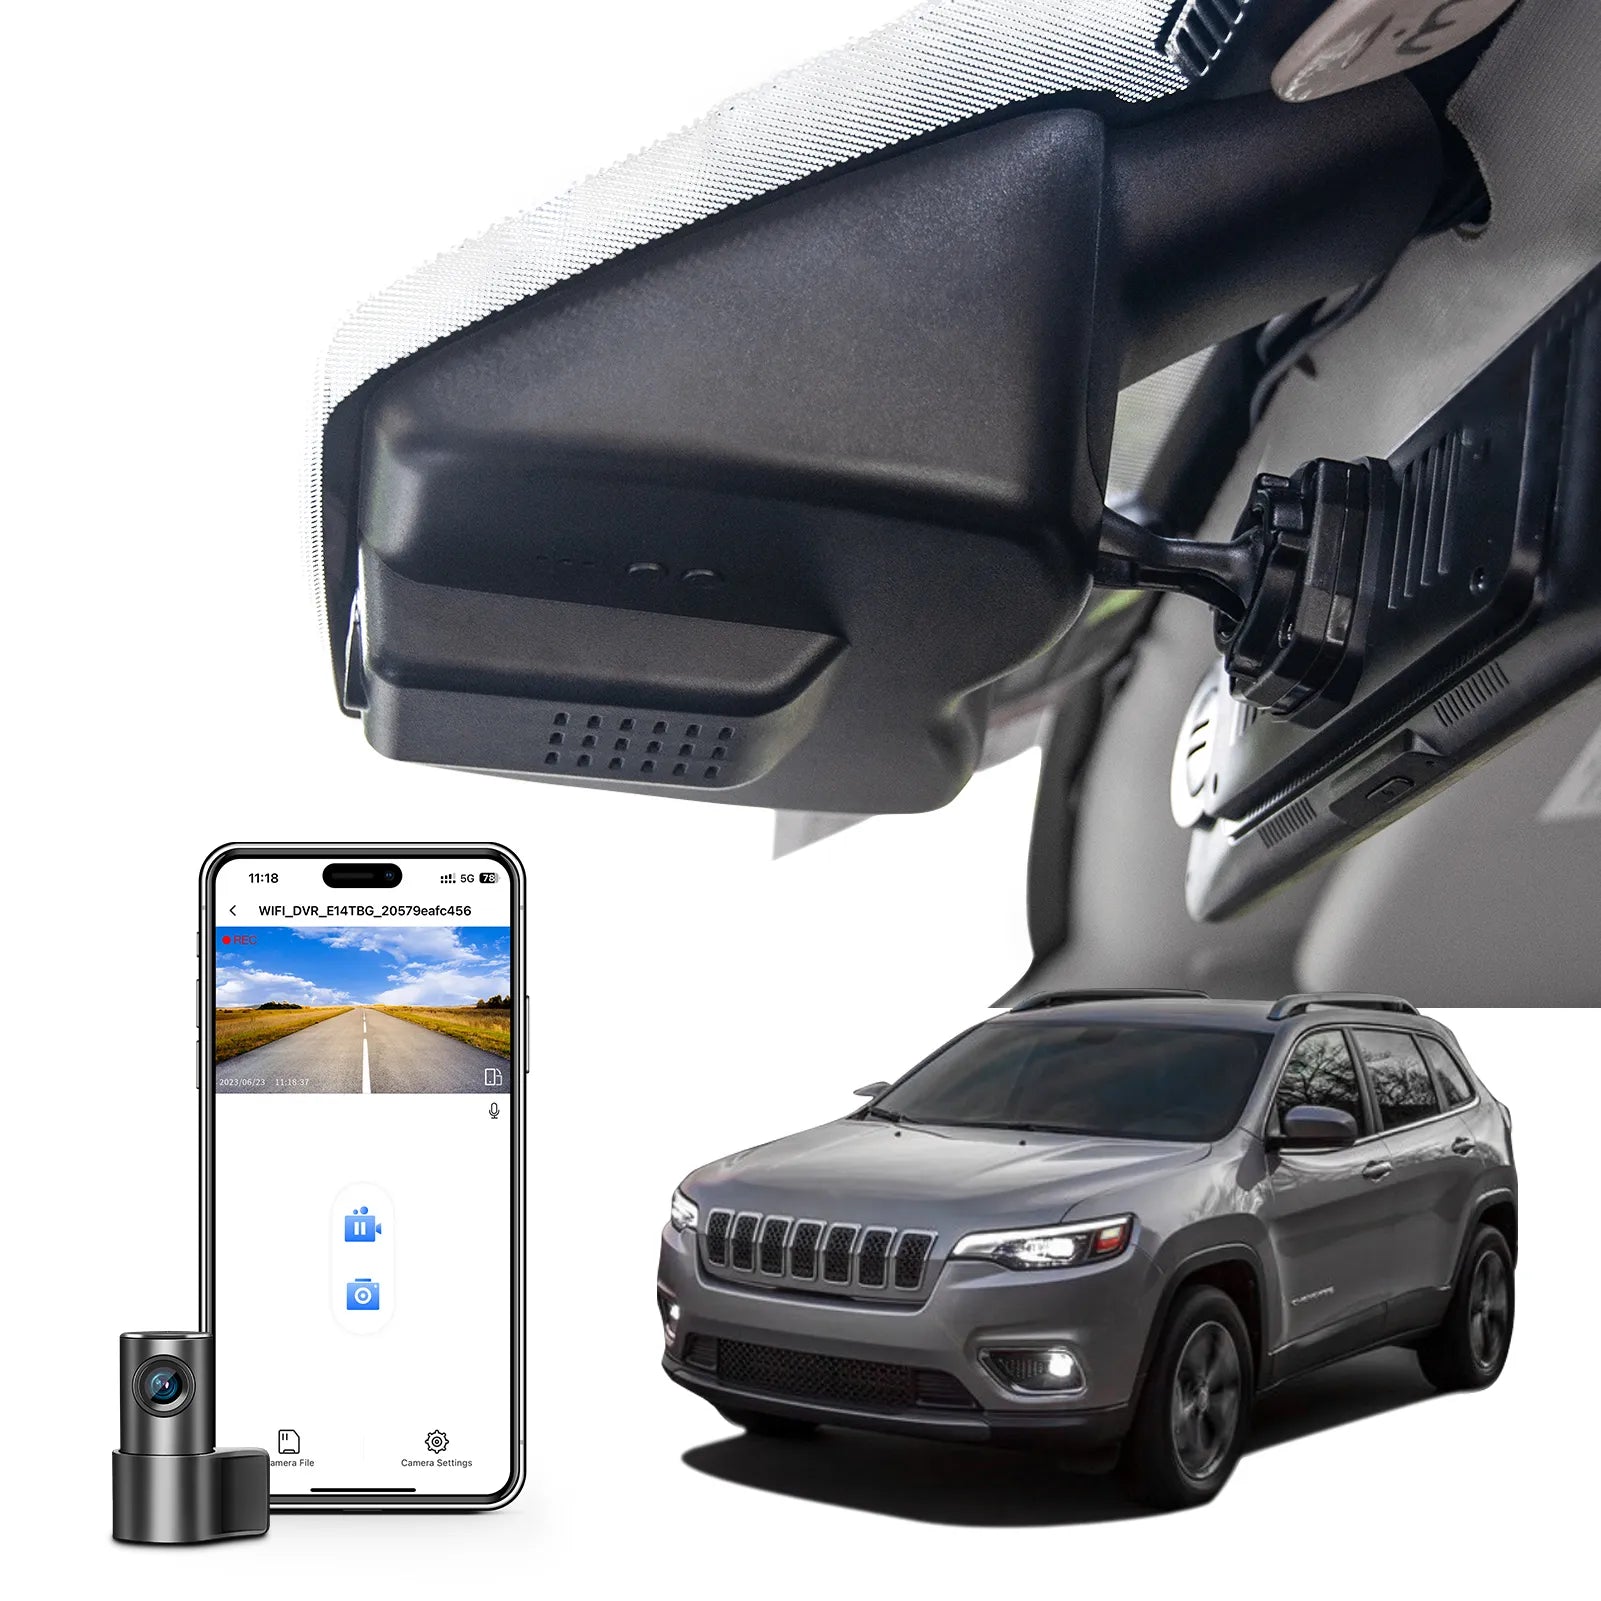 Mangoal Front 4K & Rear 1080P Dash Cam Fit for Jeep 5th Gen Cherokee 2014-2018 KL (Model C),Latitude Latitude Plus Limited Trailhawk,OEM Look, UHD 2160P Video, Easy to Install Free App and 128GB Card